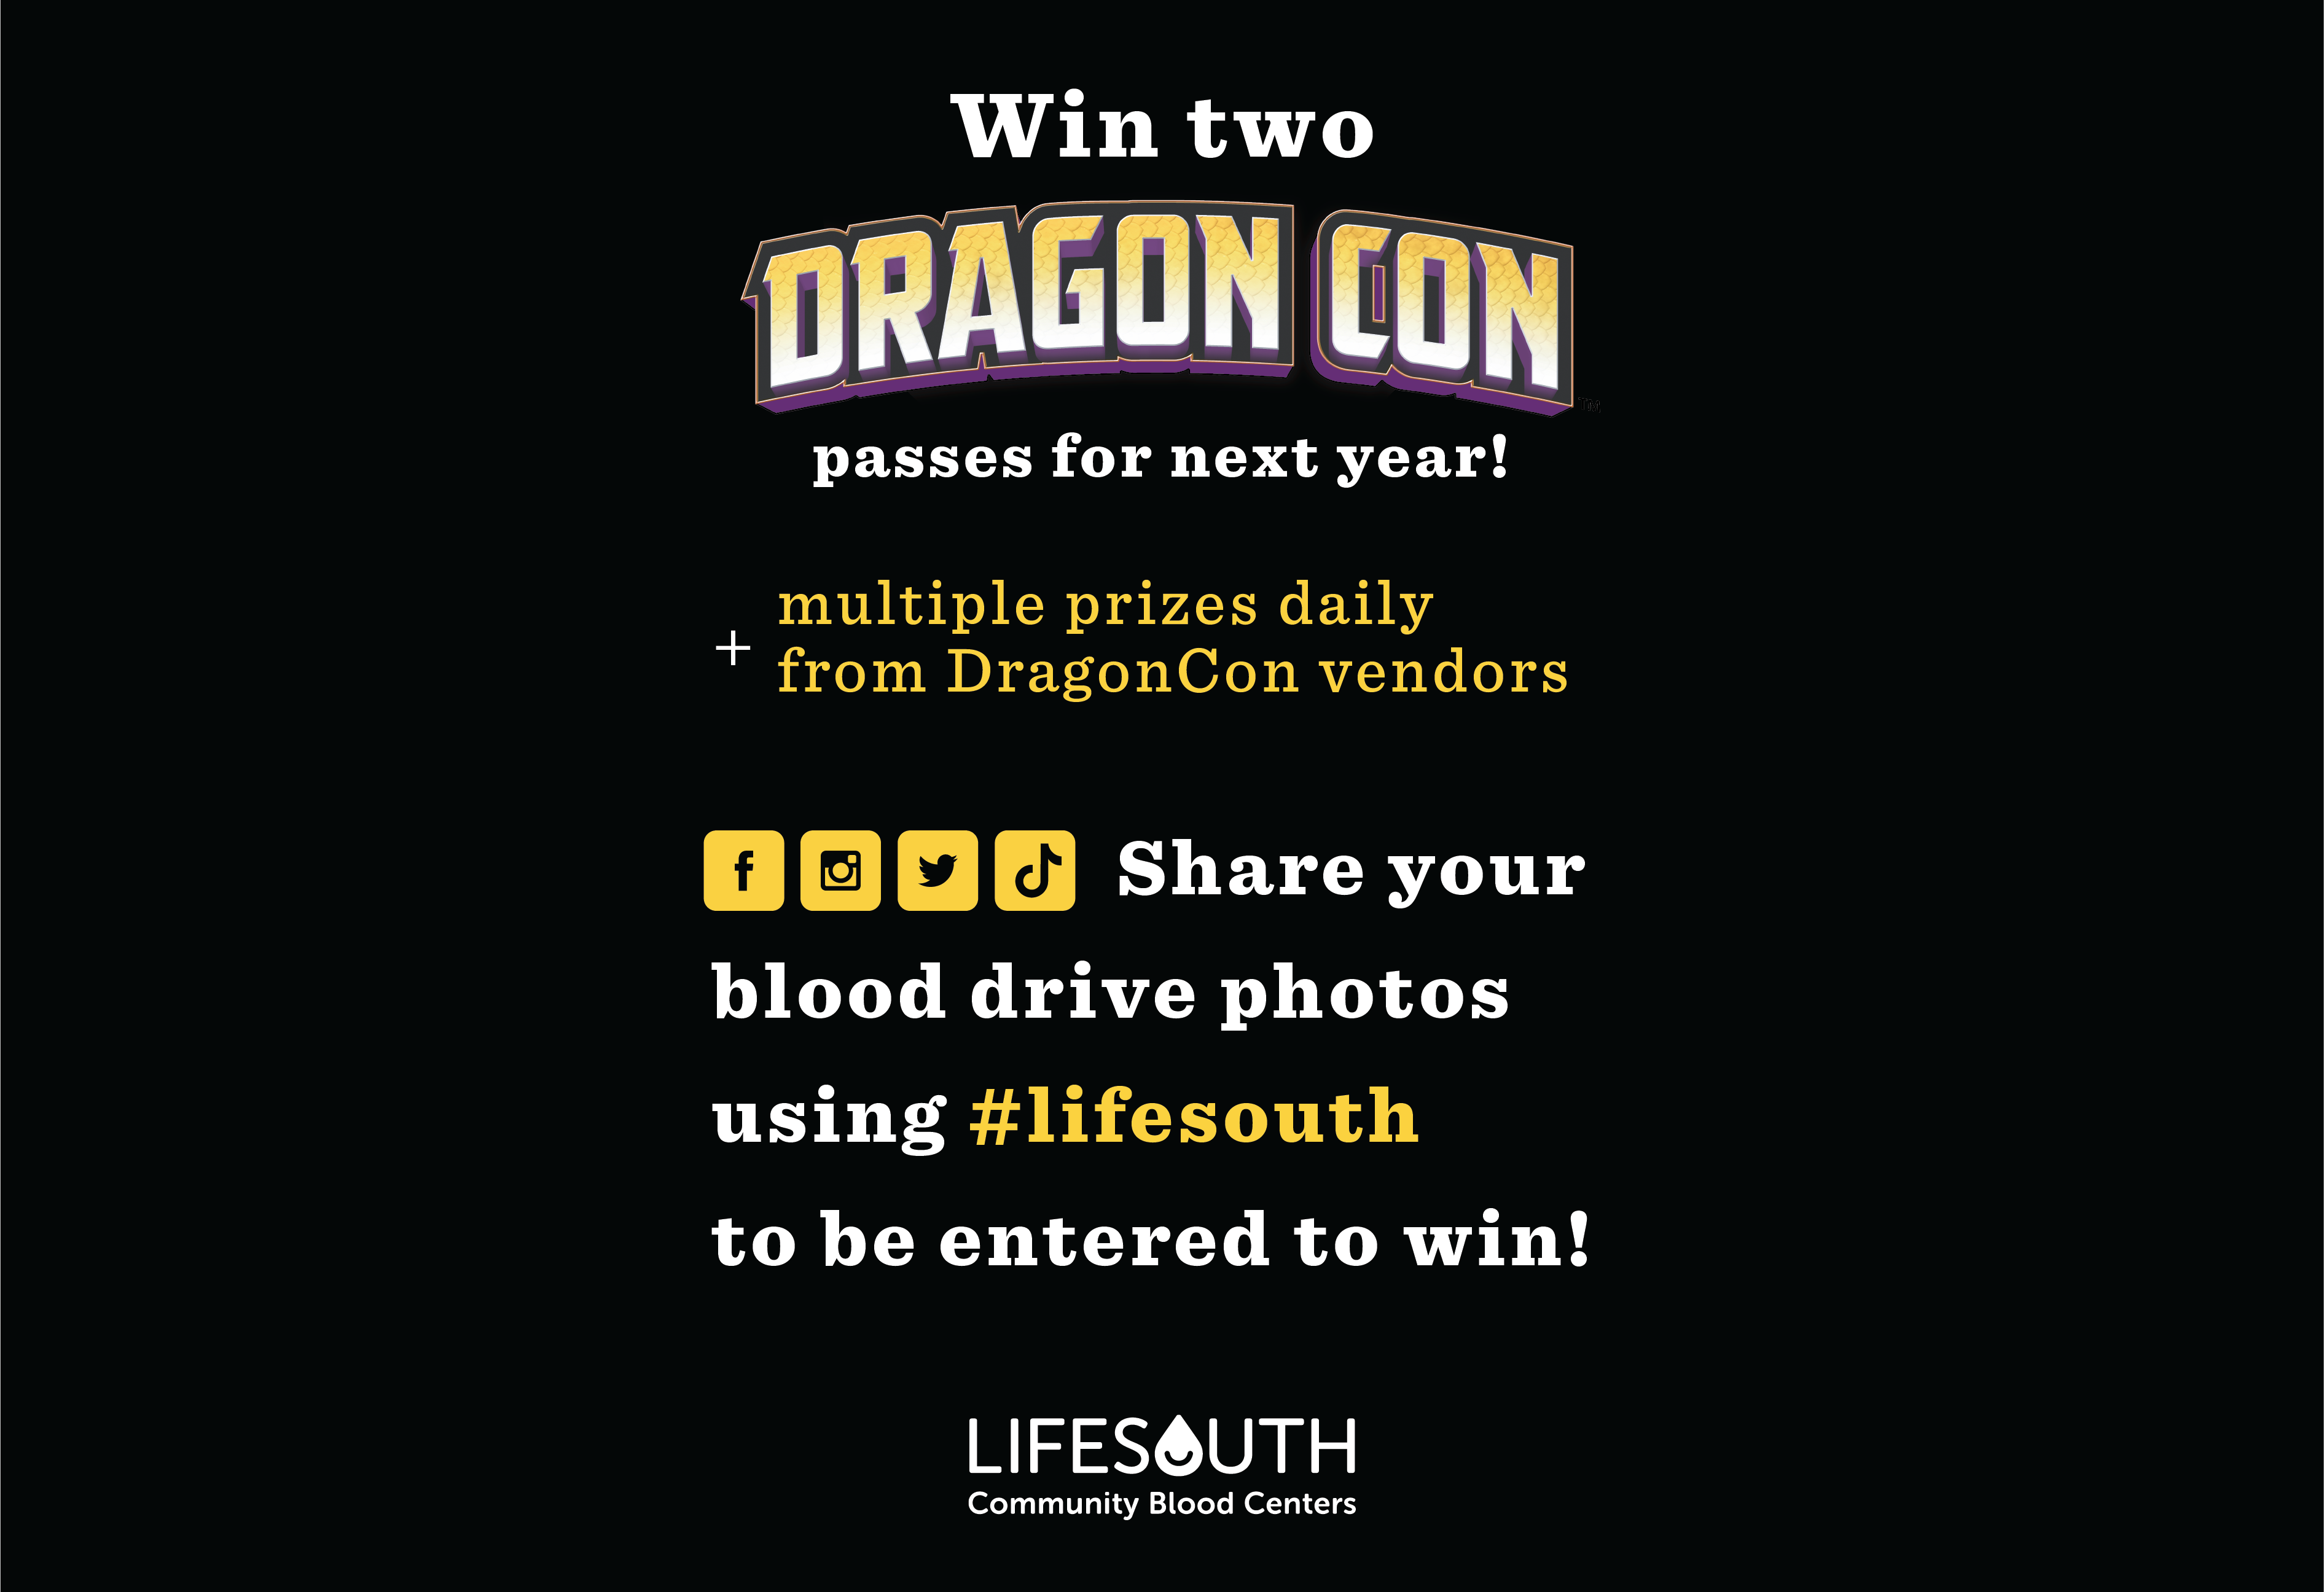 Win Dragon Con passes for next year if you post on social media with #lifesouth